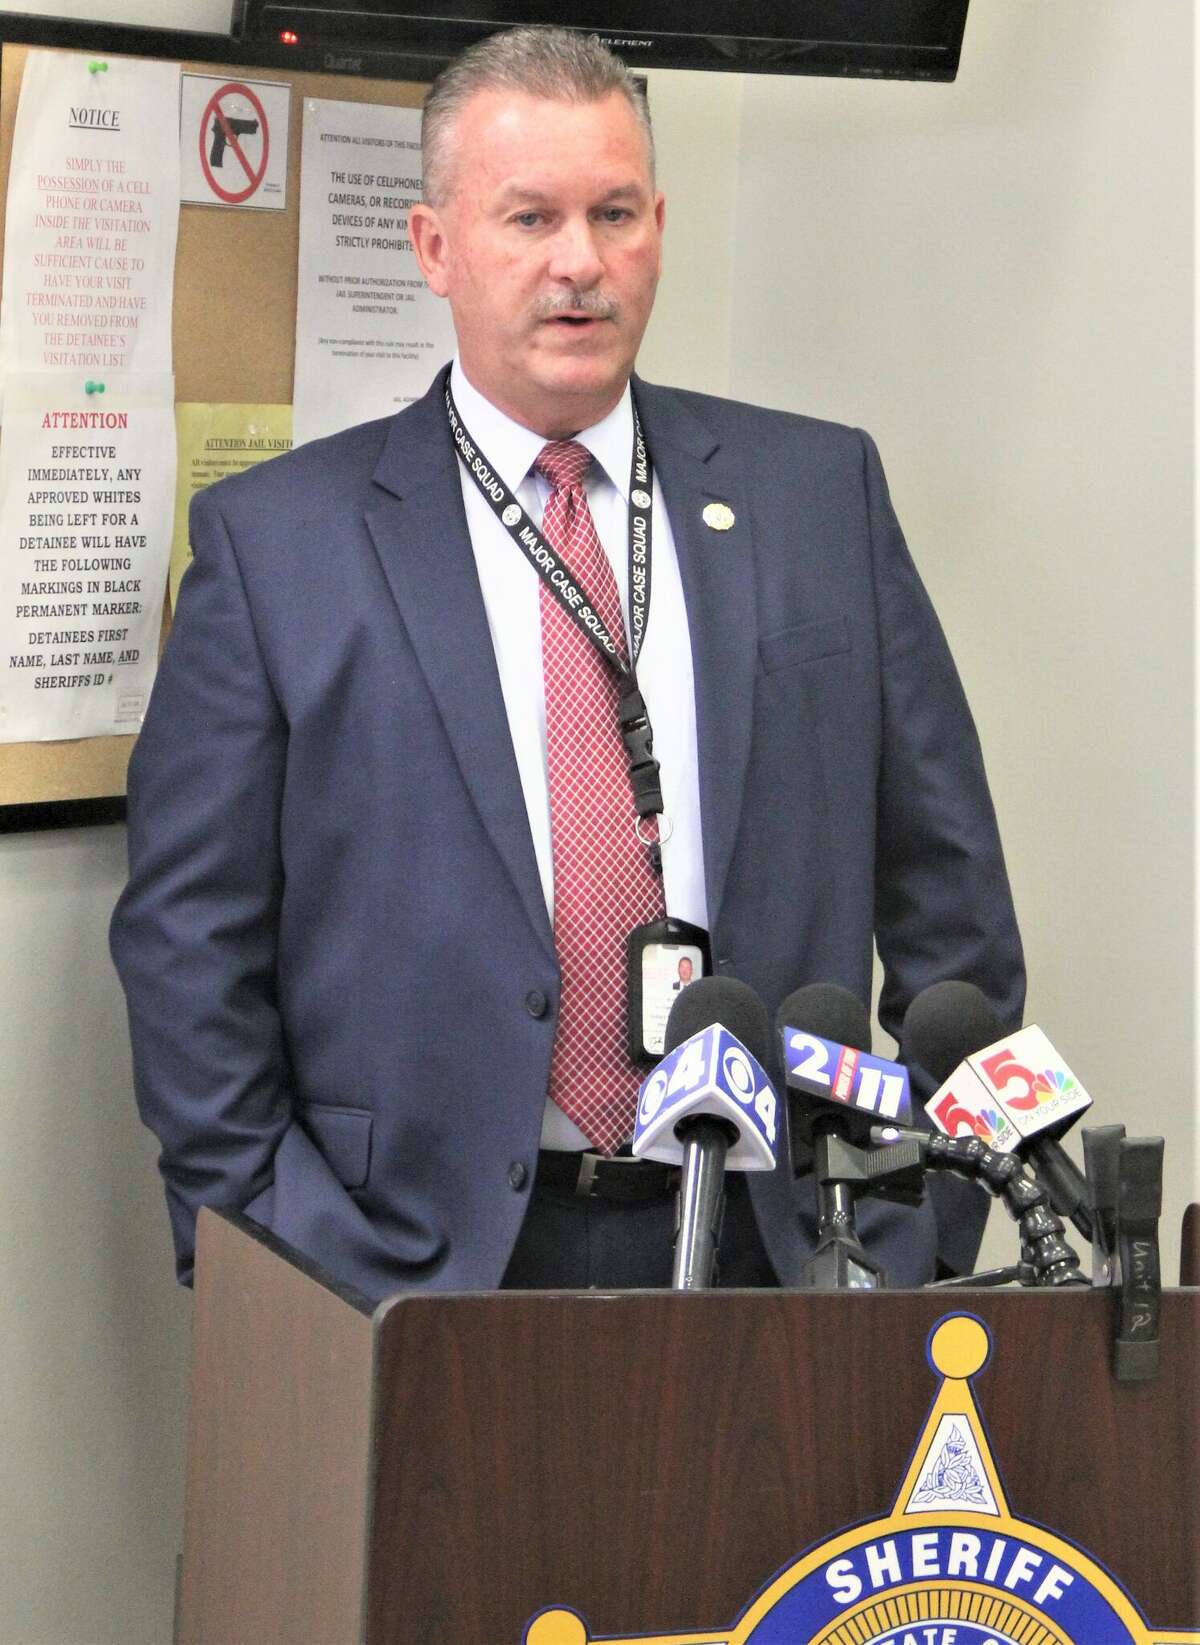 Maj. Jeff Connor, chief deputy for the Madison County Sheriff’s Department, speaks during a press conference regarding a double homicide Saturday morning in the Collinsville area. The suspect died Sunday morning after being shot by an Illinois State Police trooper.